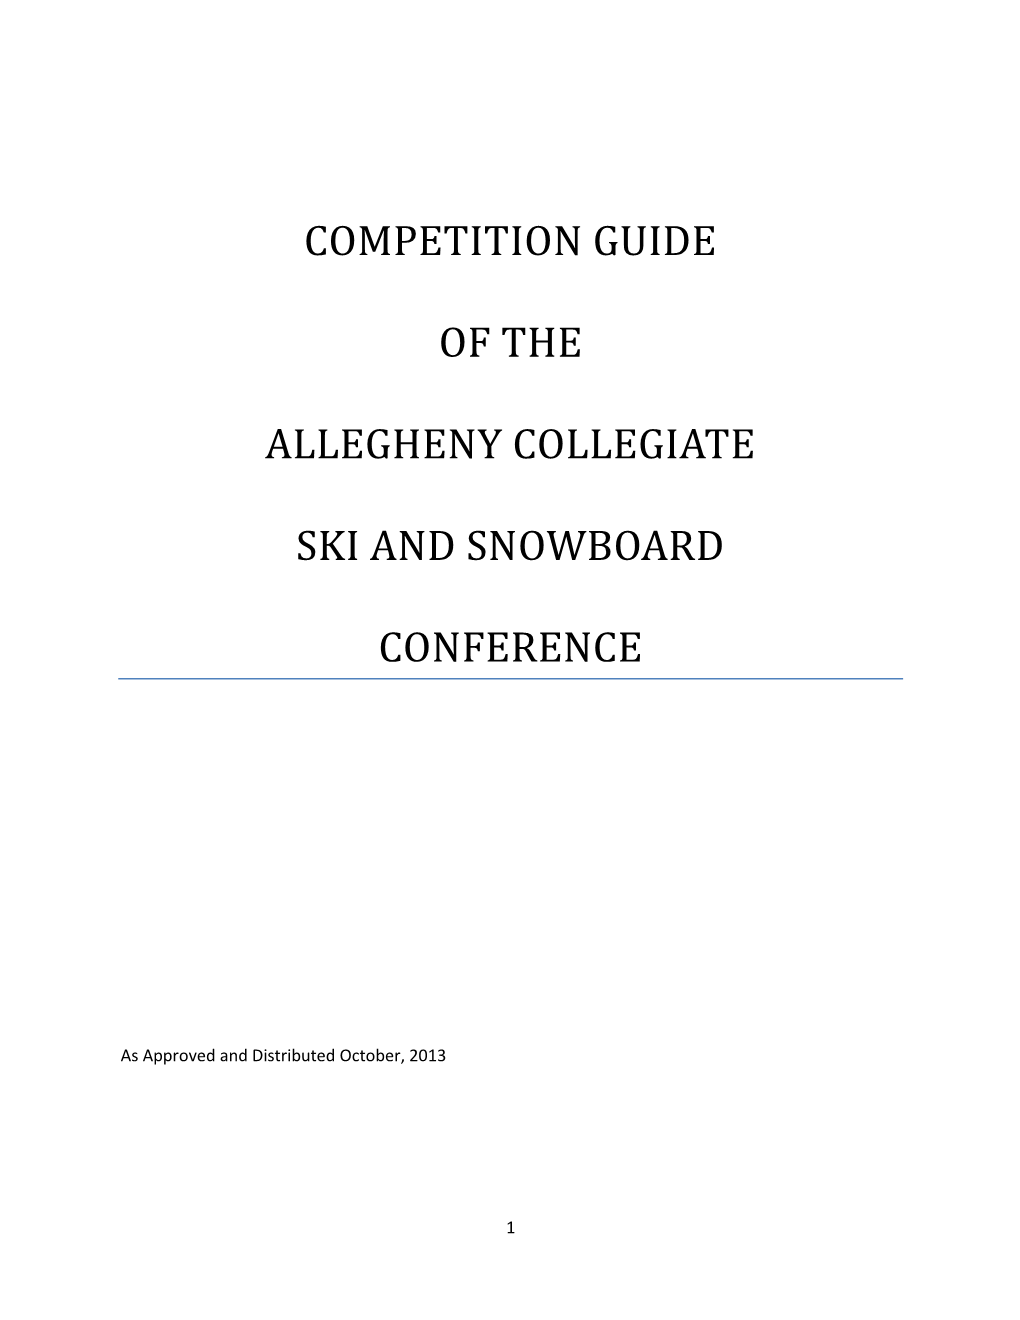 Competition Guide of the Allegheny Collegiate Ski and Snowboard